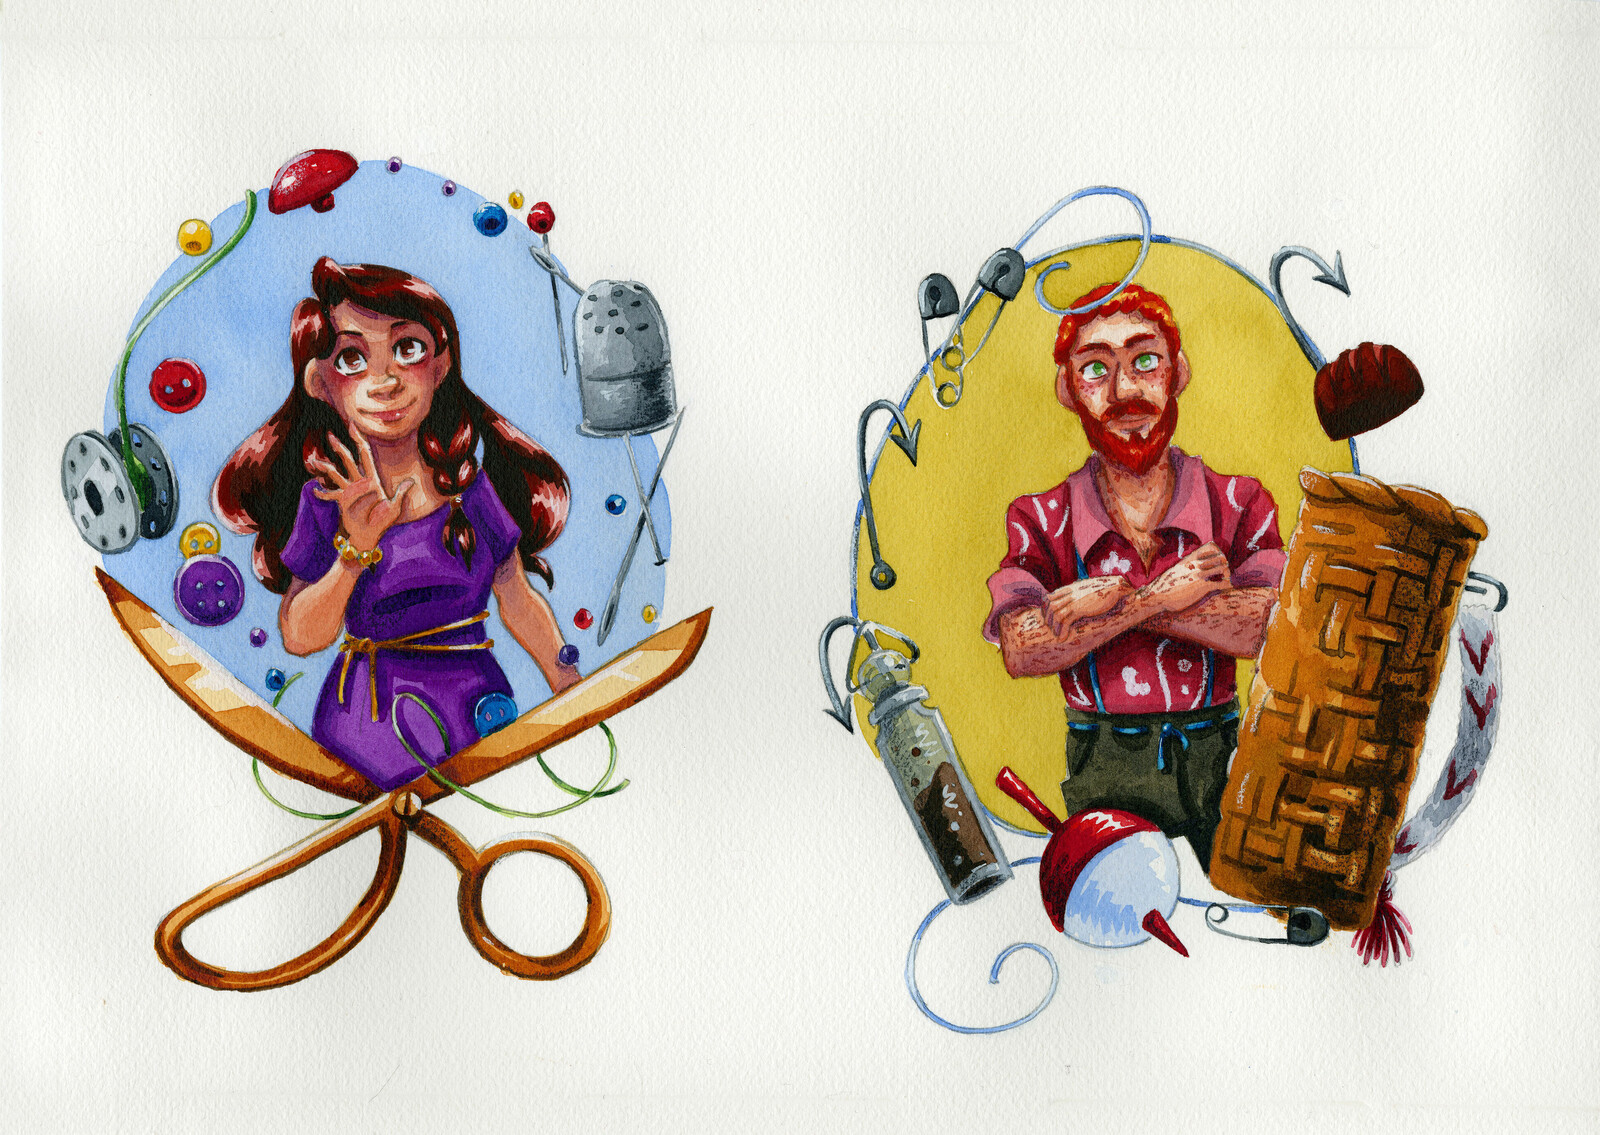 Final cast of characters watercolor illustrations.